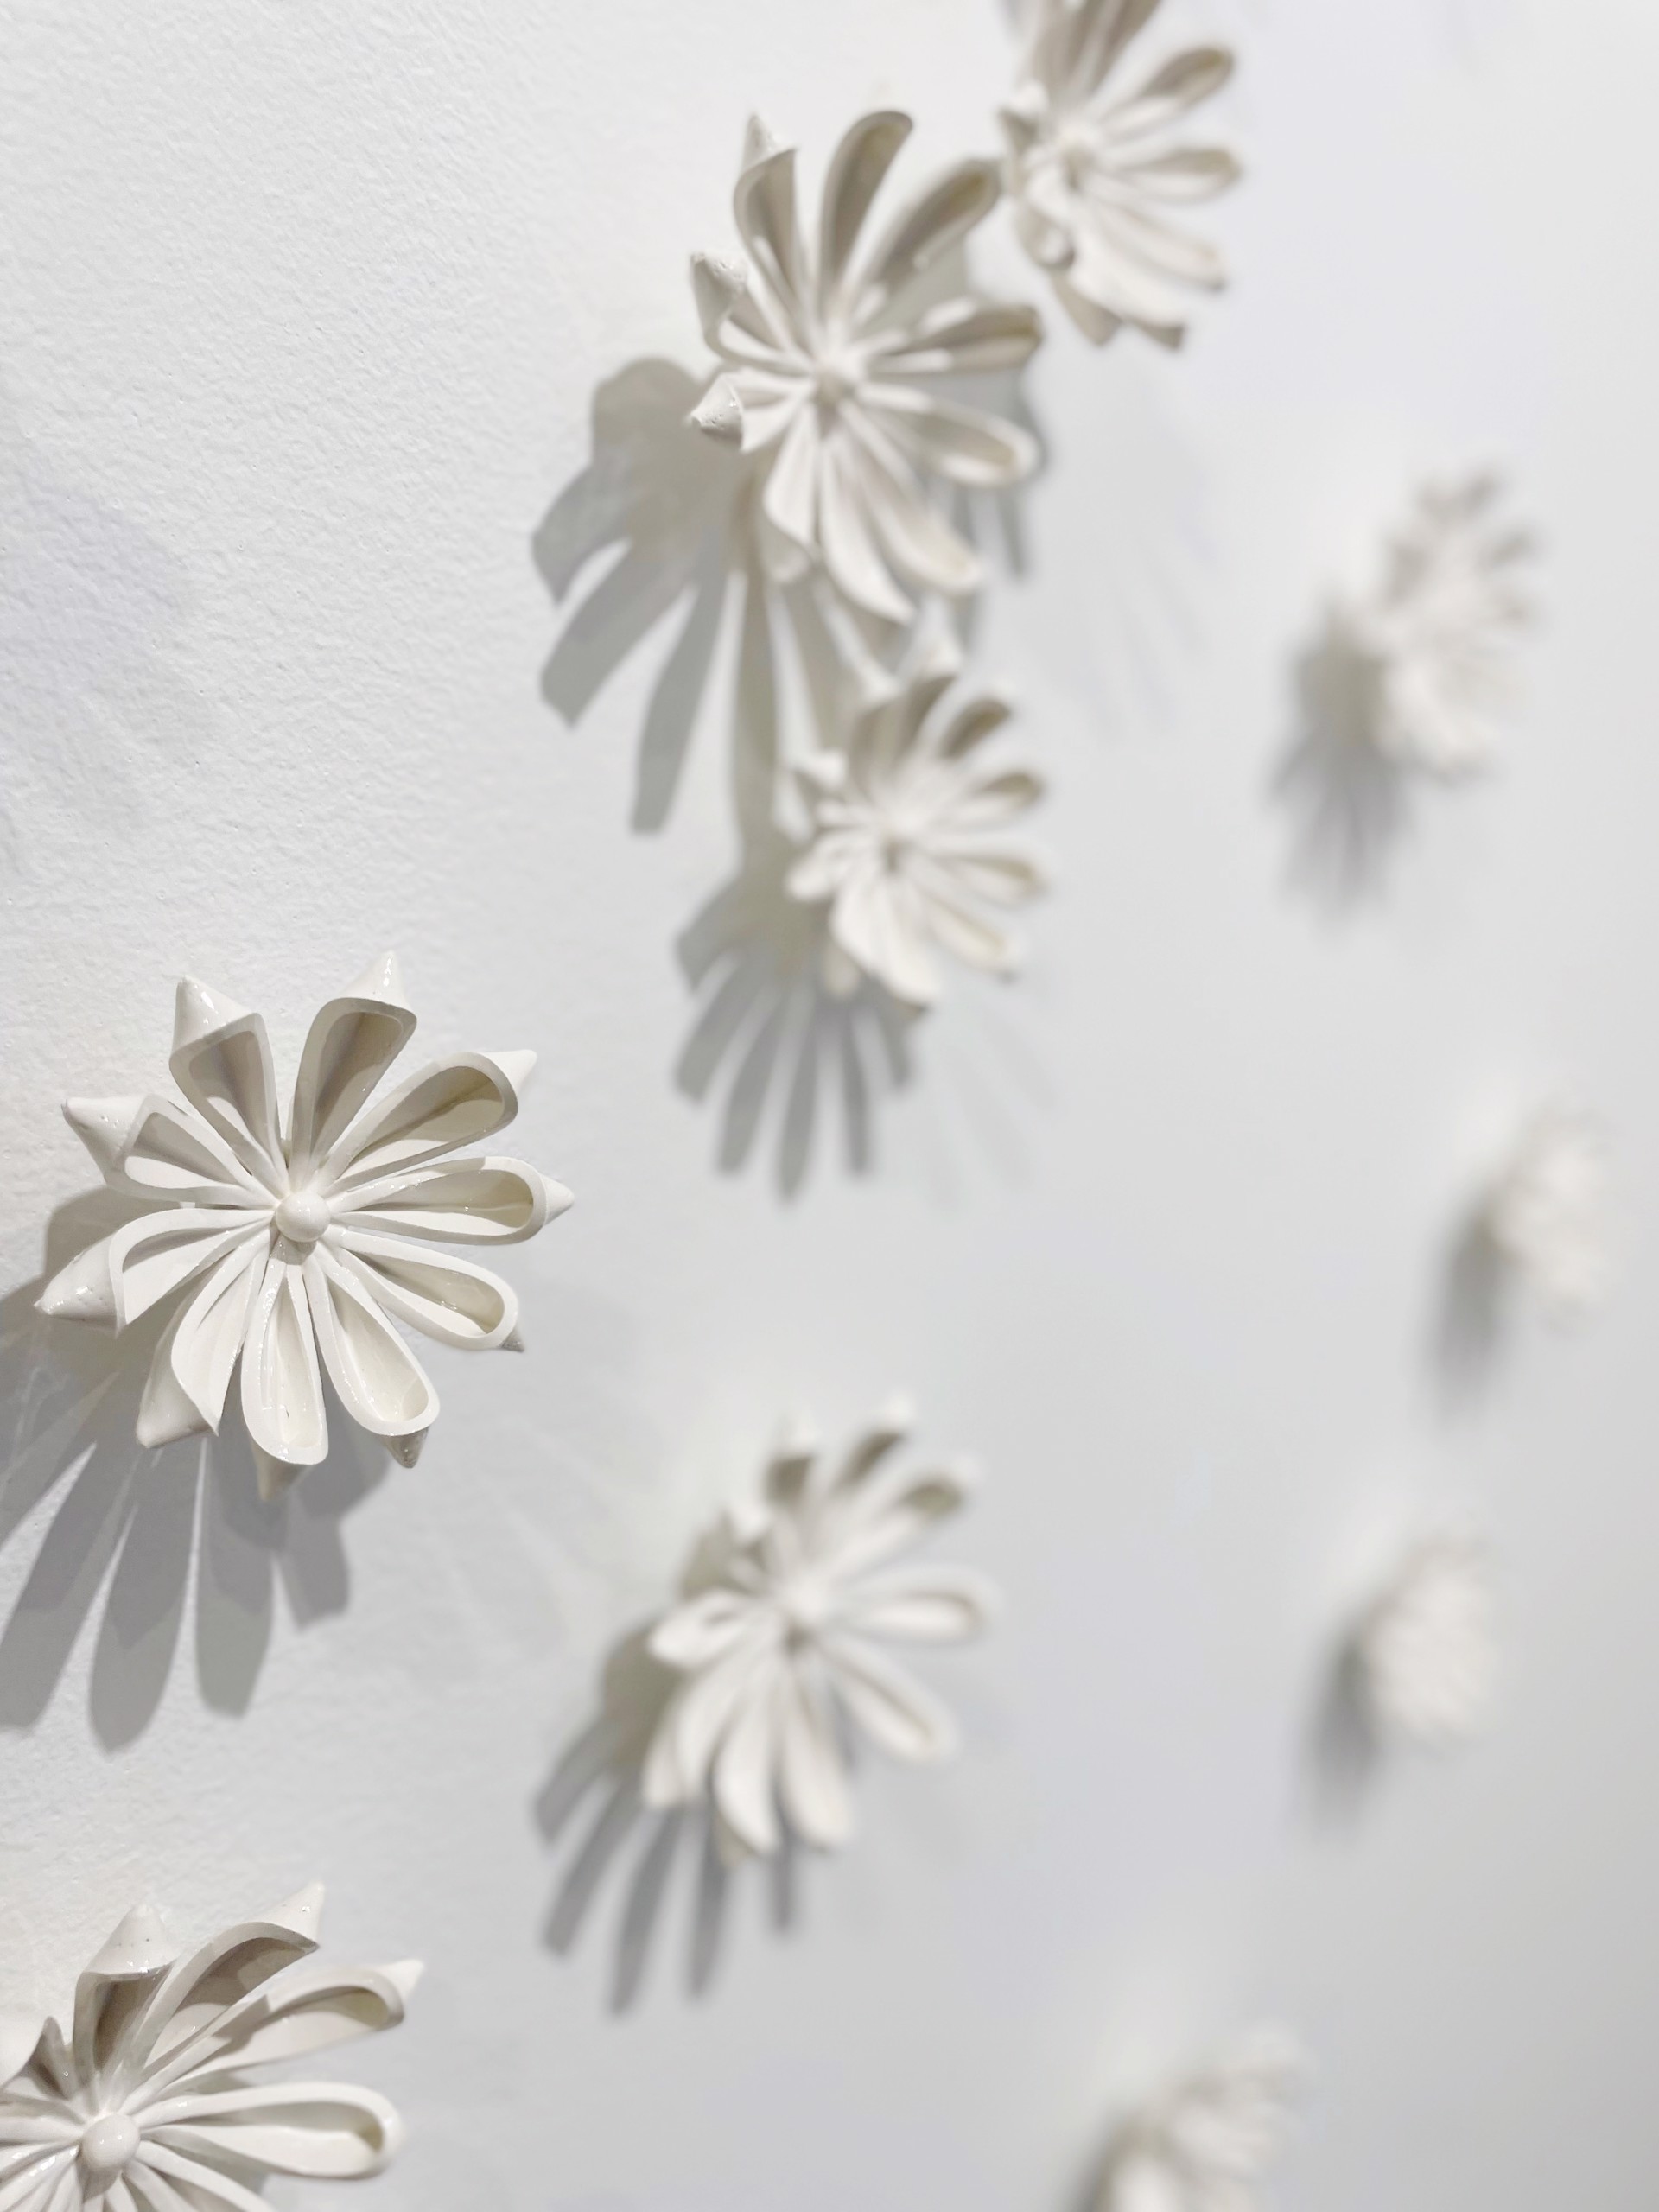 Floral Wall Sculpture by Isabelle Coppinger